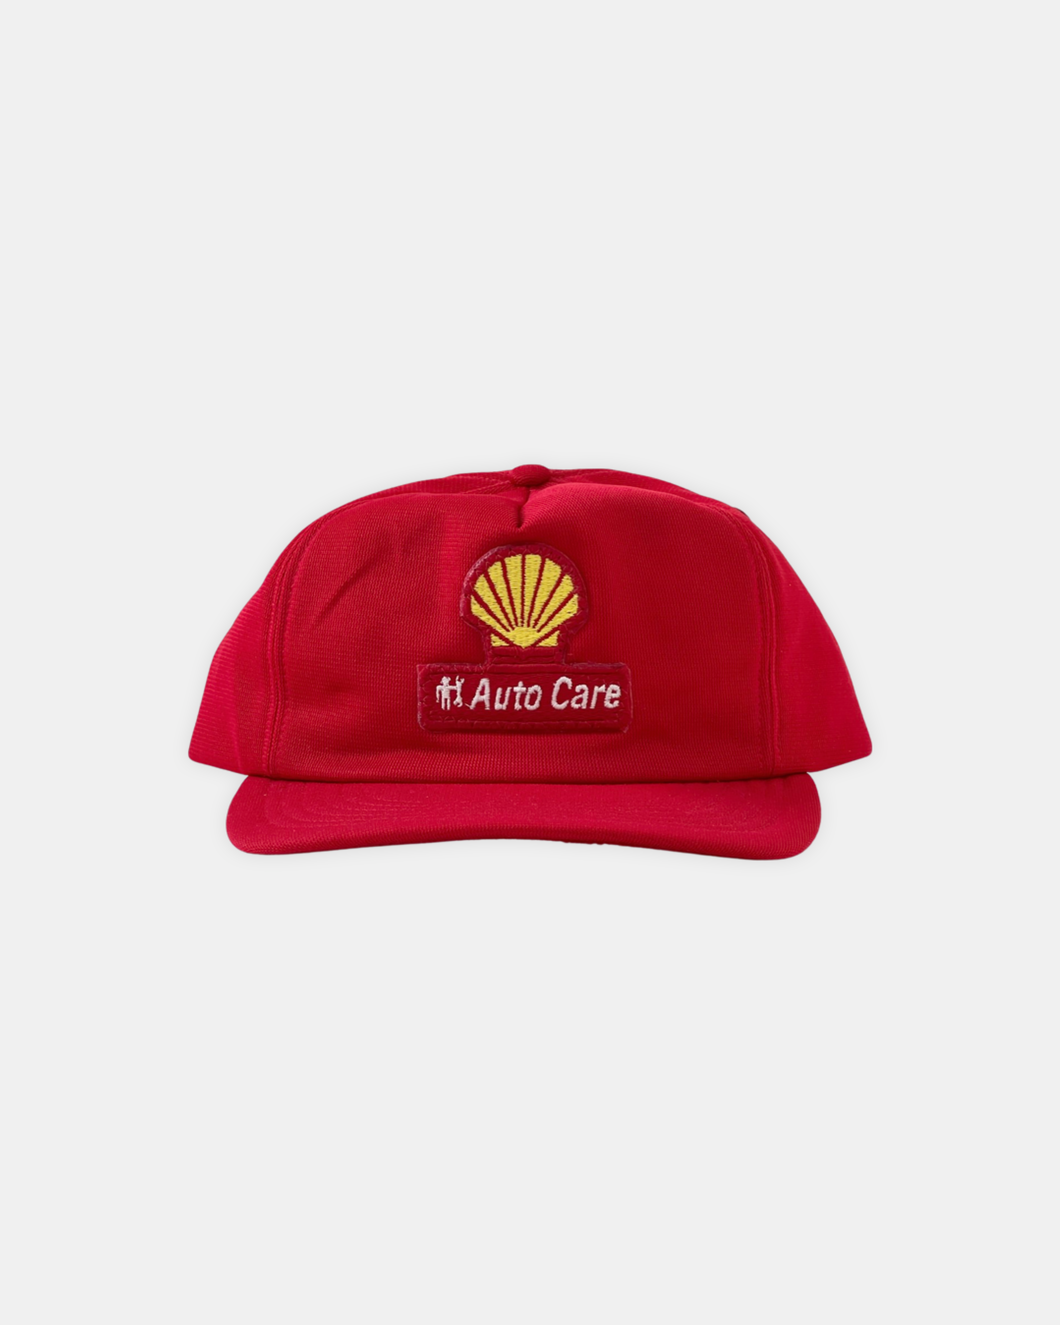 Vintage 80s Shell Auto Care Snapback Hat